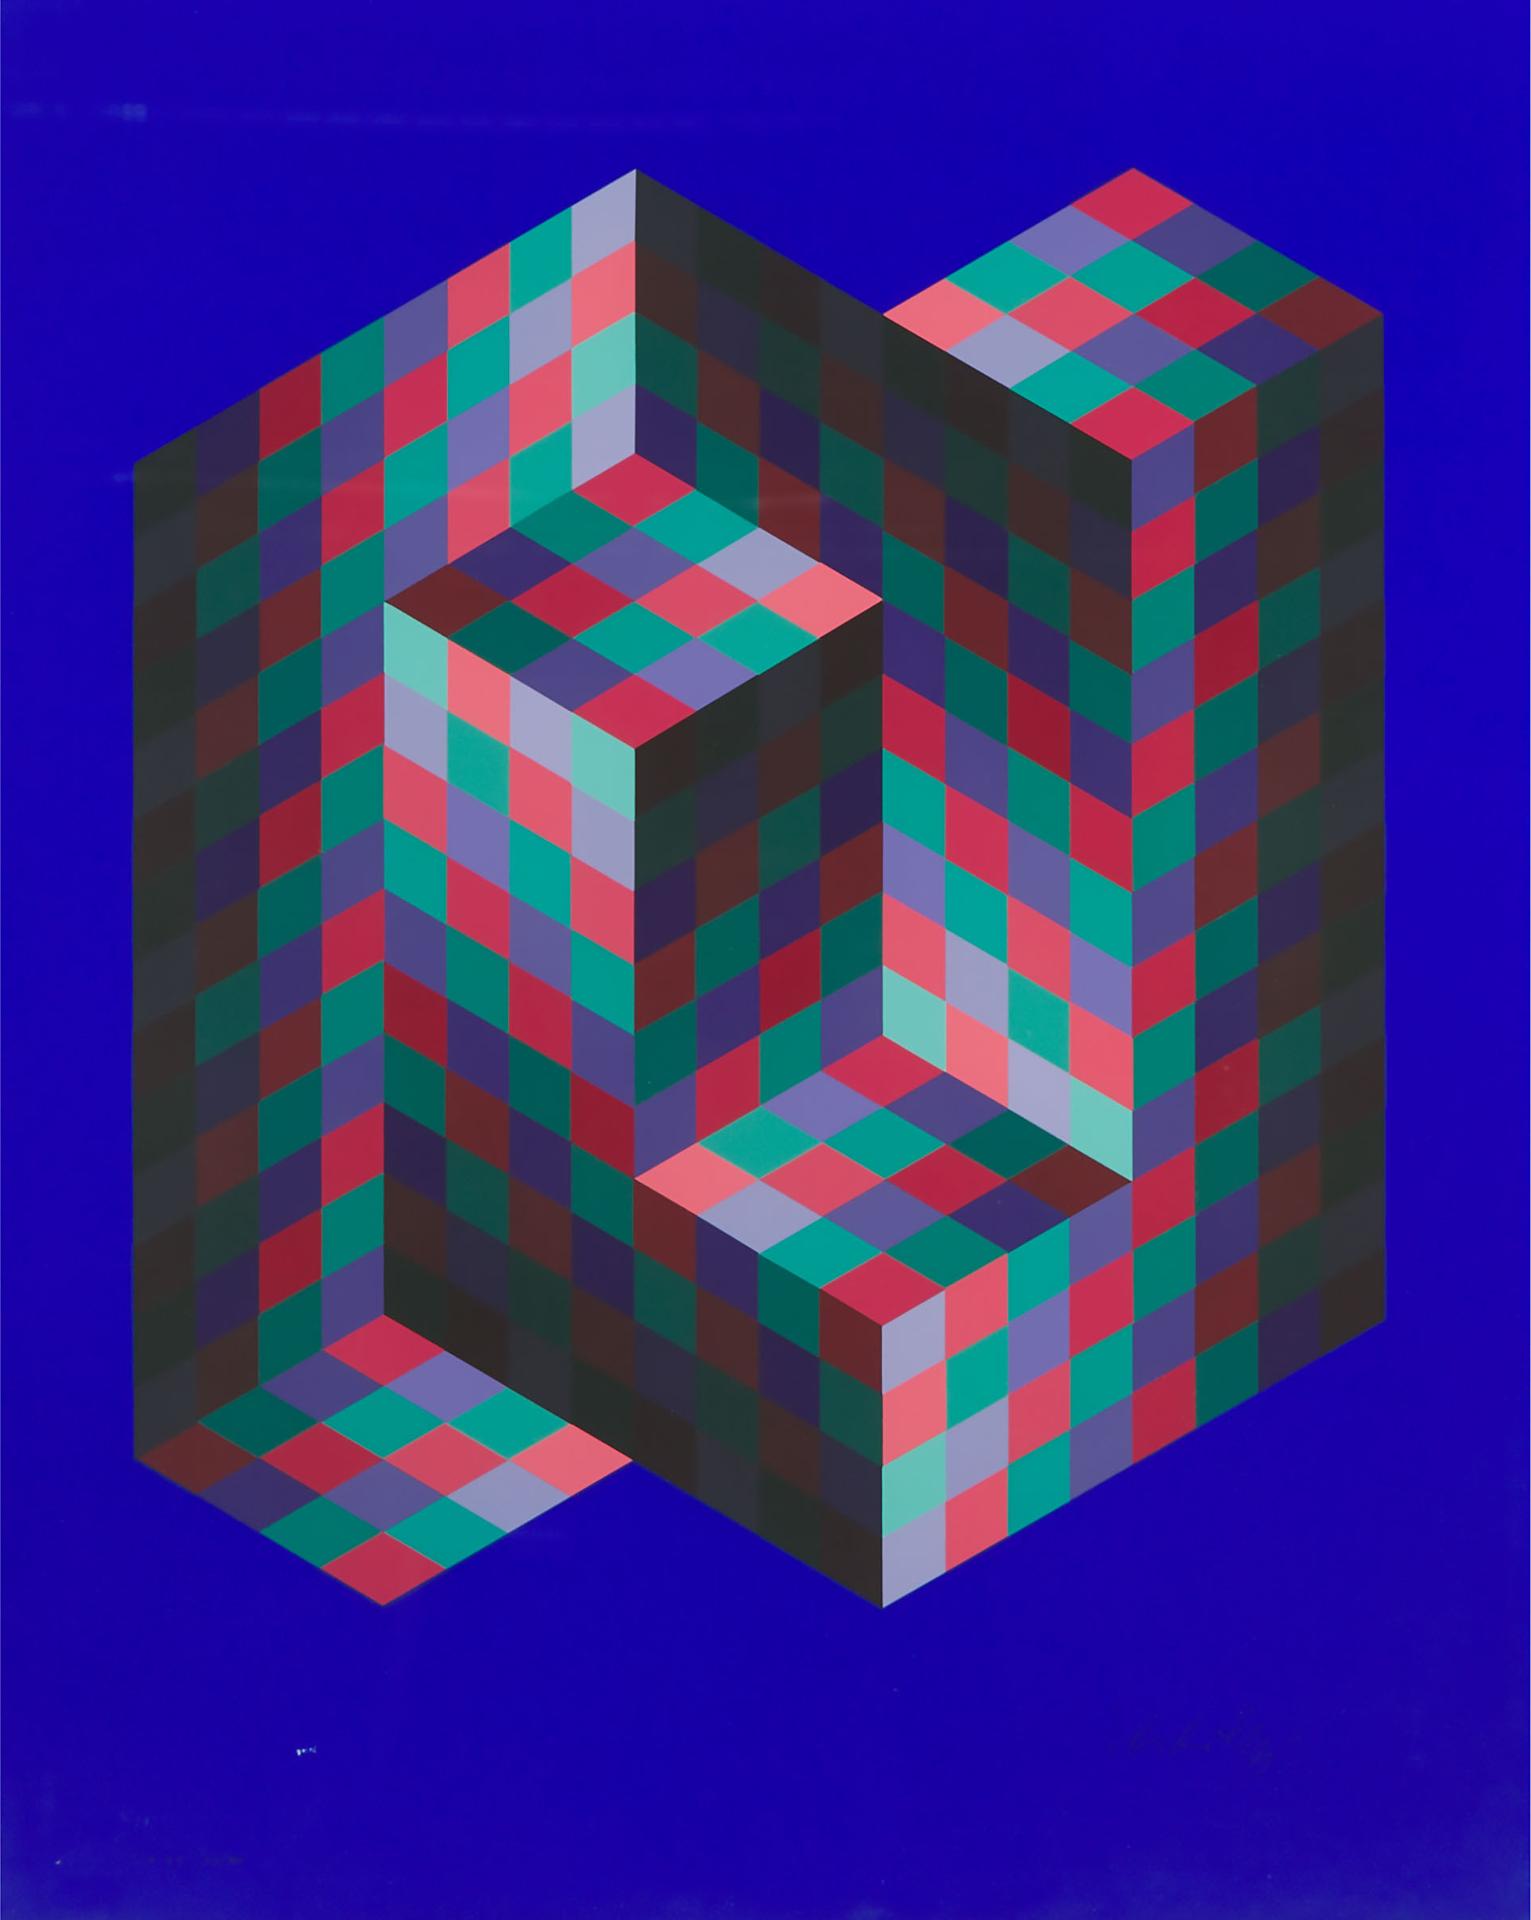 Victor Vasarely (1906-1997) - Iz-Zo (From Bach), 1973